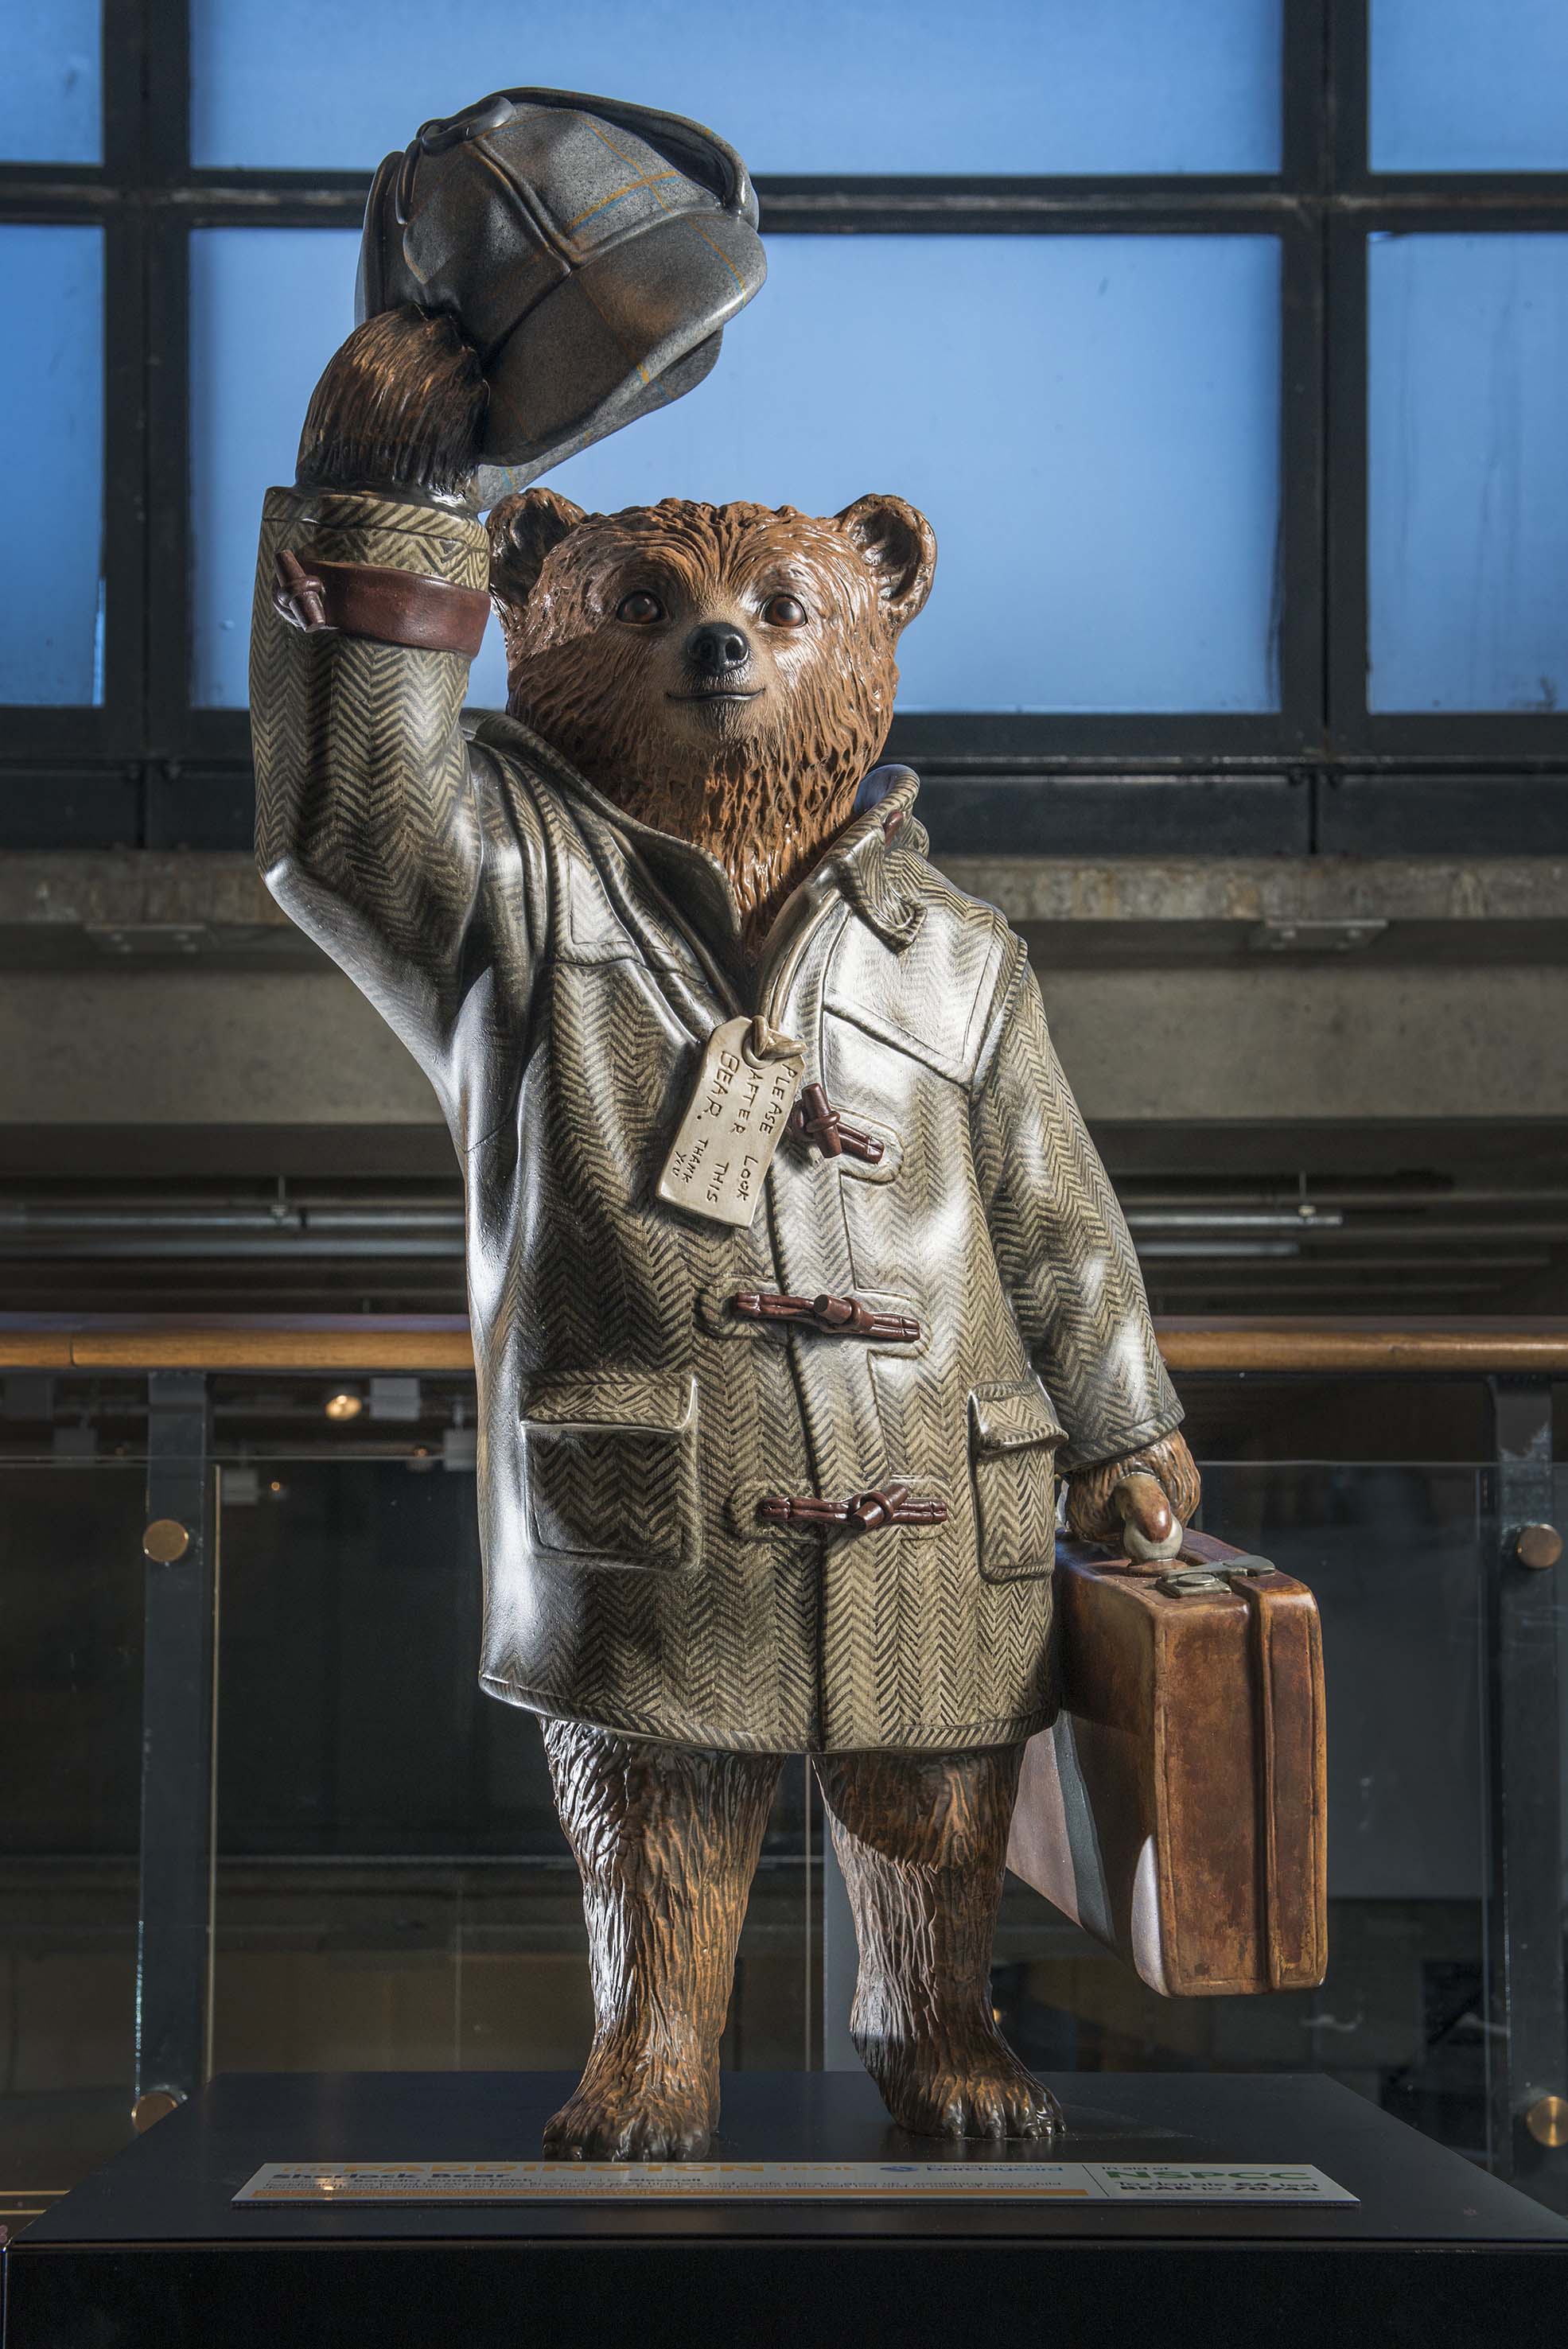 A Bear Called Paddington About London Laura London and Beyond